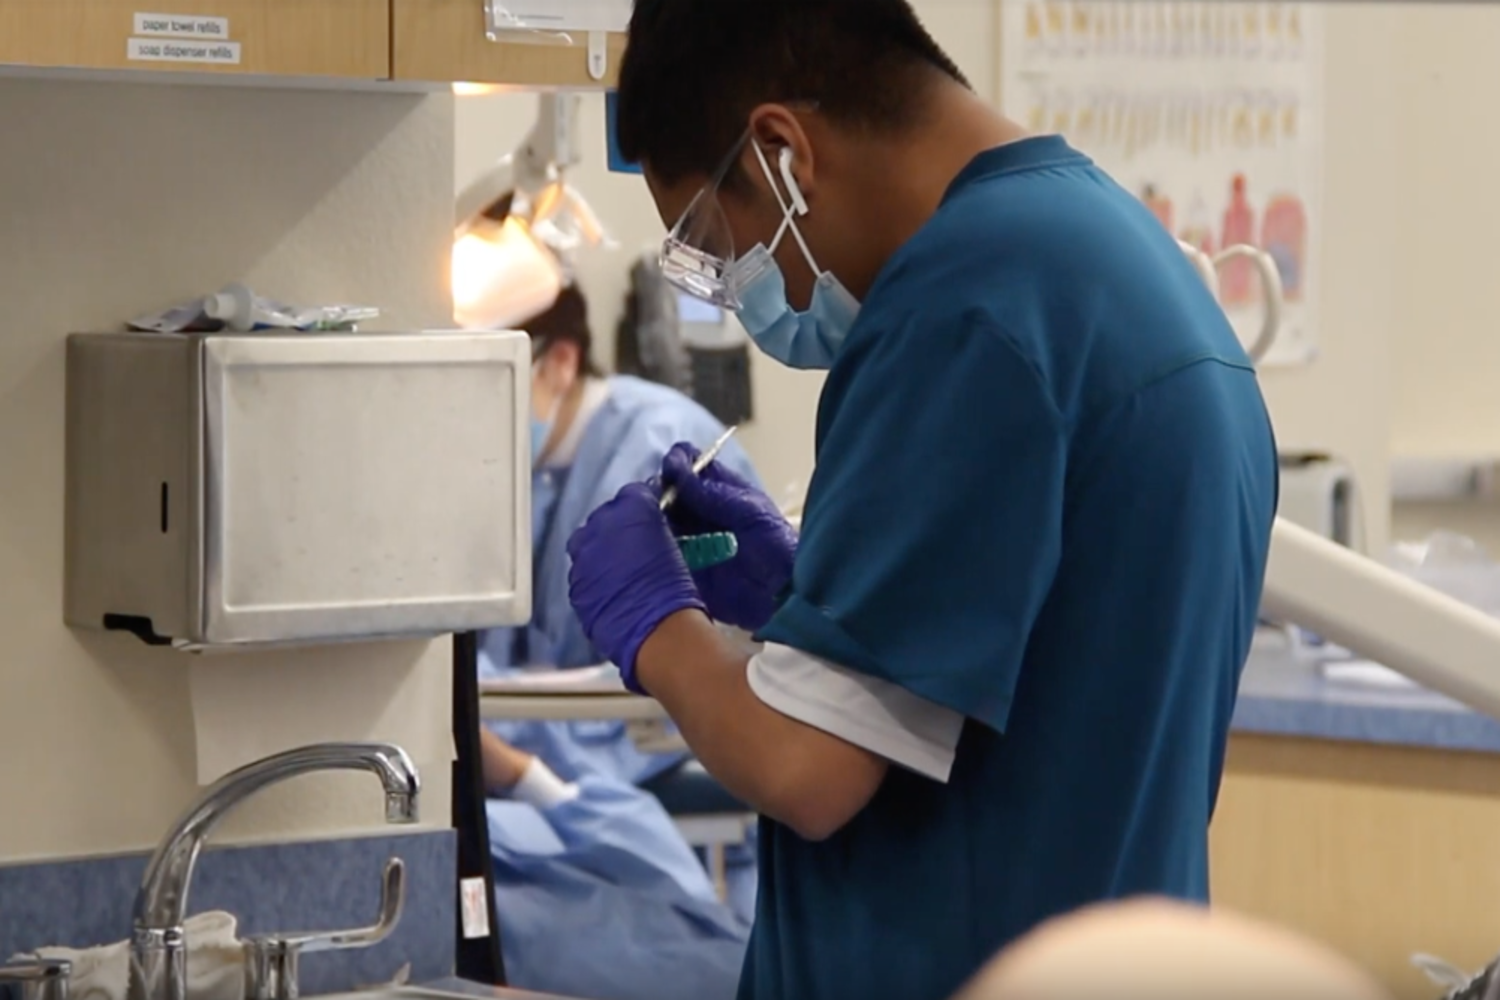 VIDEO: QR codes used in Dental for organization